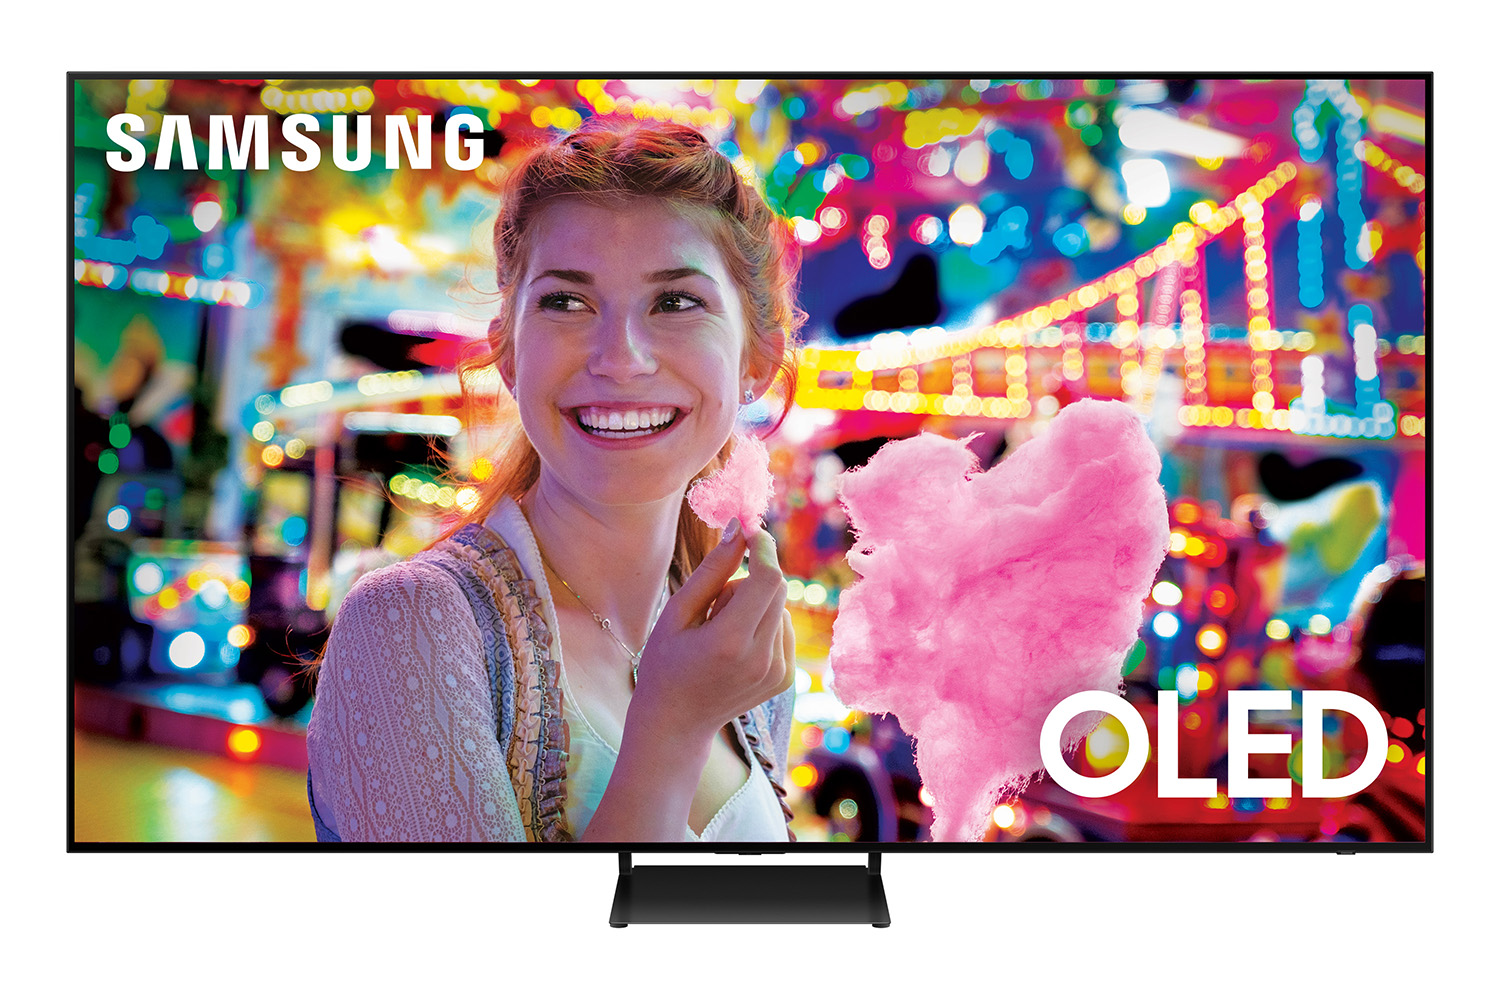 A press image of the Samsung 83-inch Q90 OLED television.